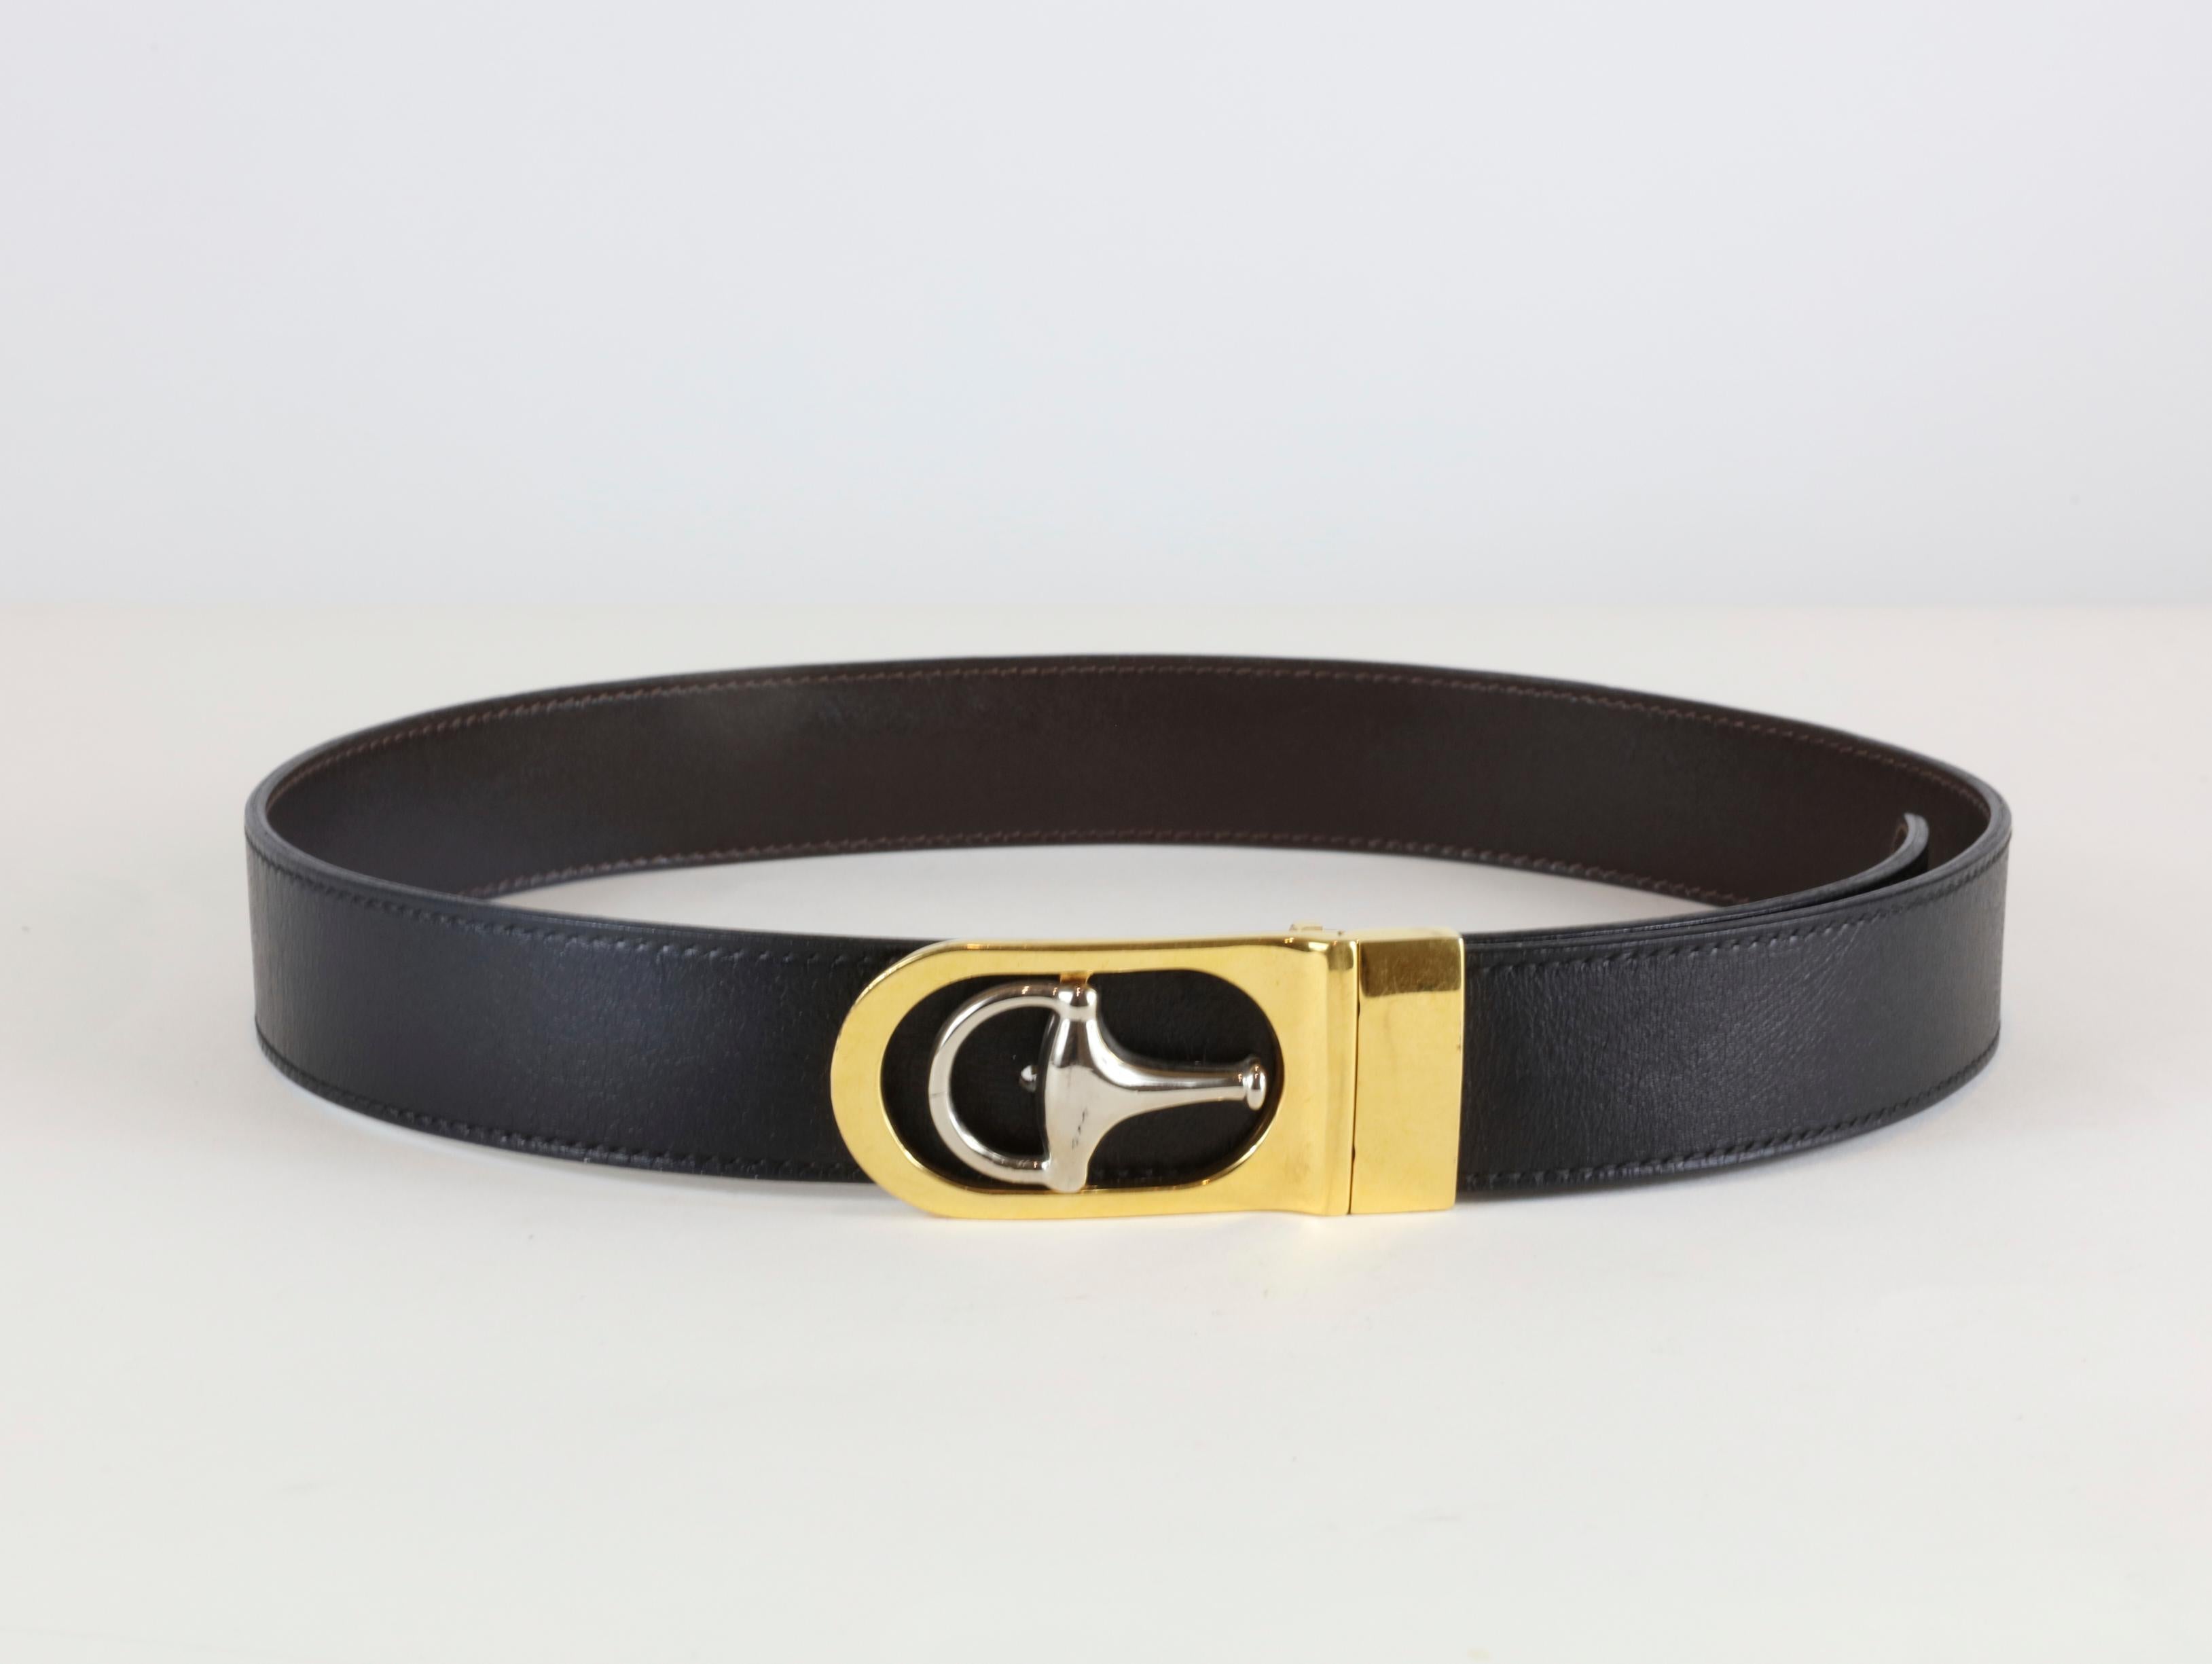 Gucci Black Leather Belt with Silver and Gold Hardware
33